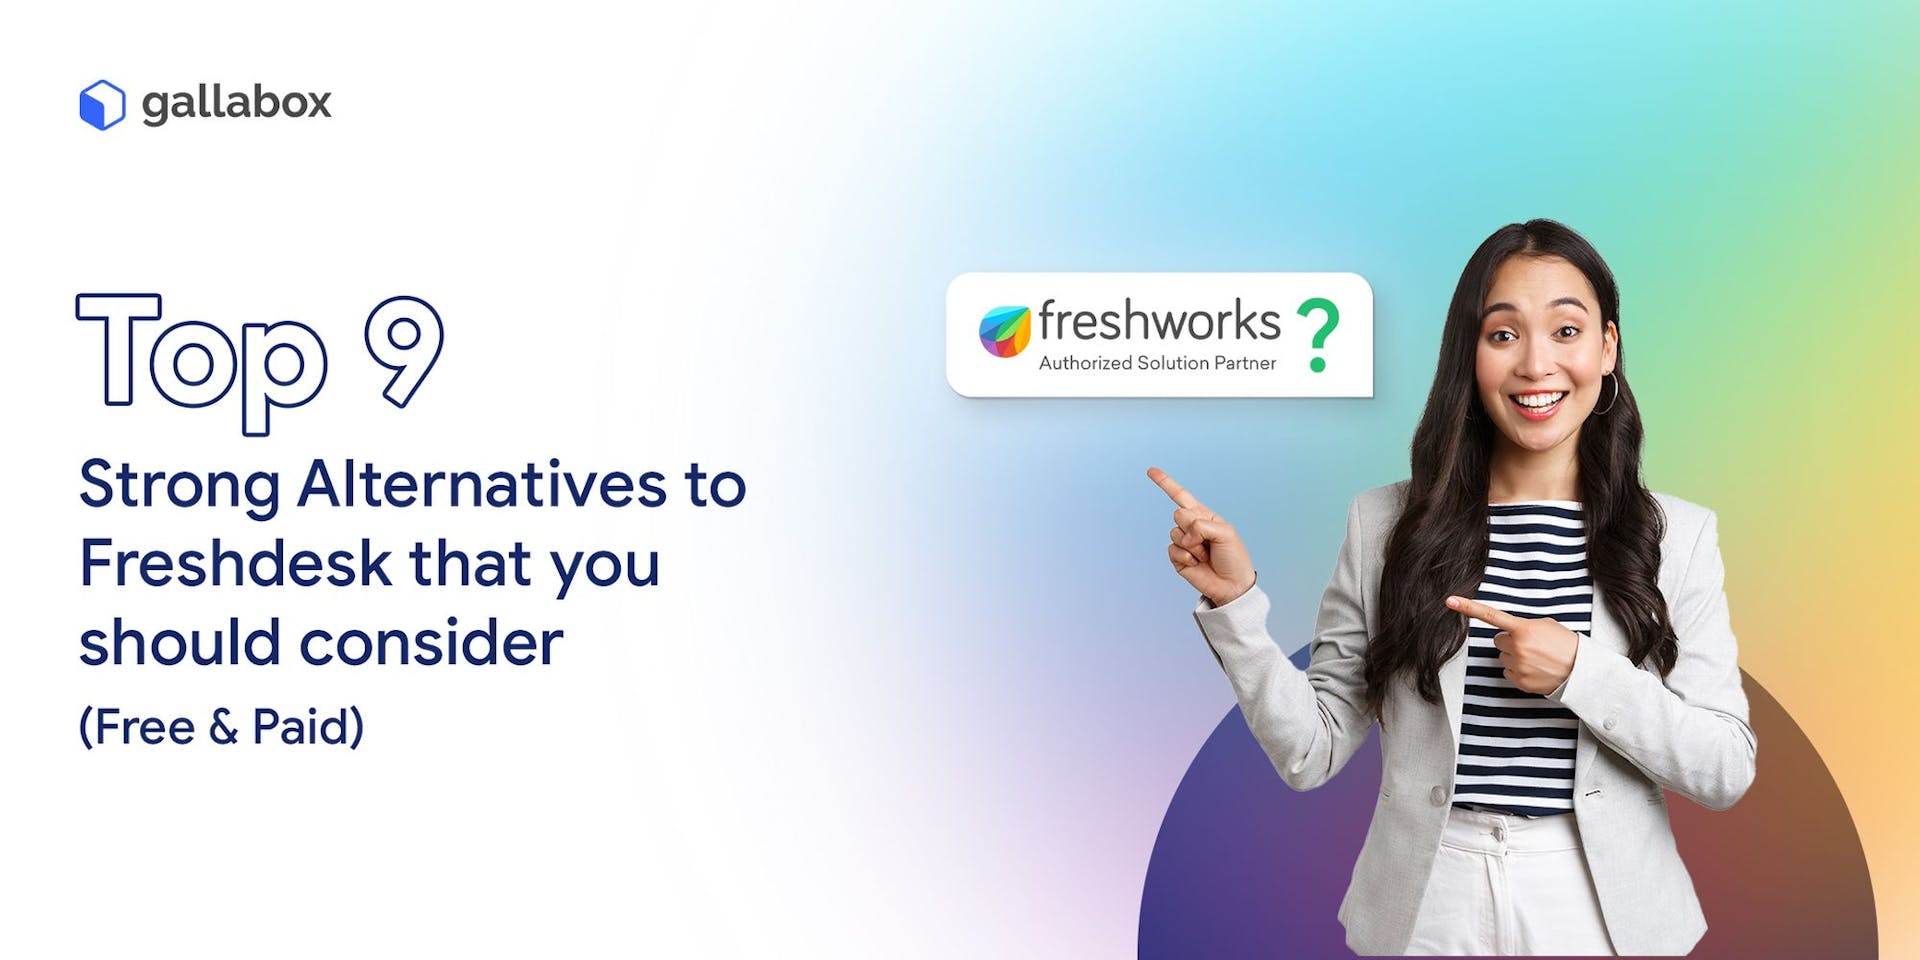 Top 9 strong alternatives to Freshdesk (Free & Paid)